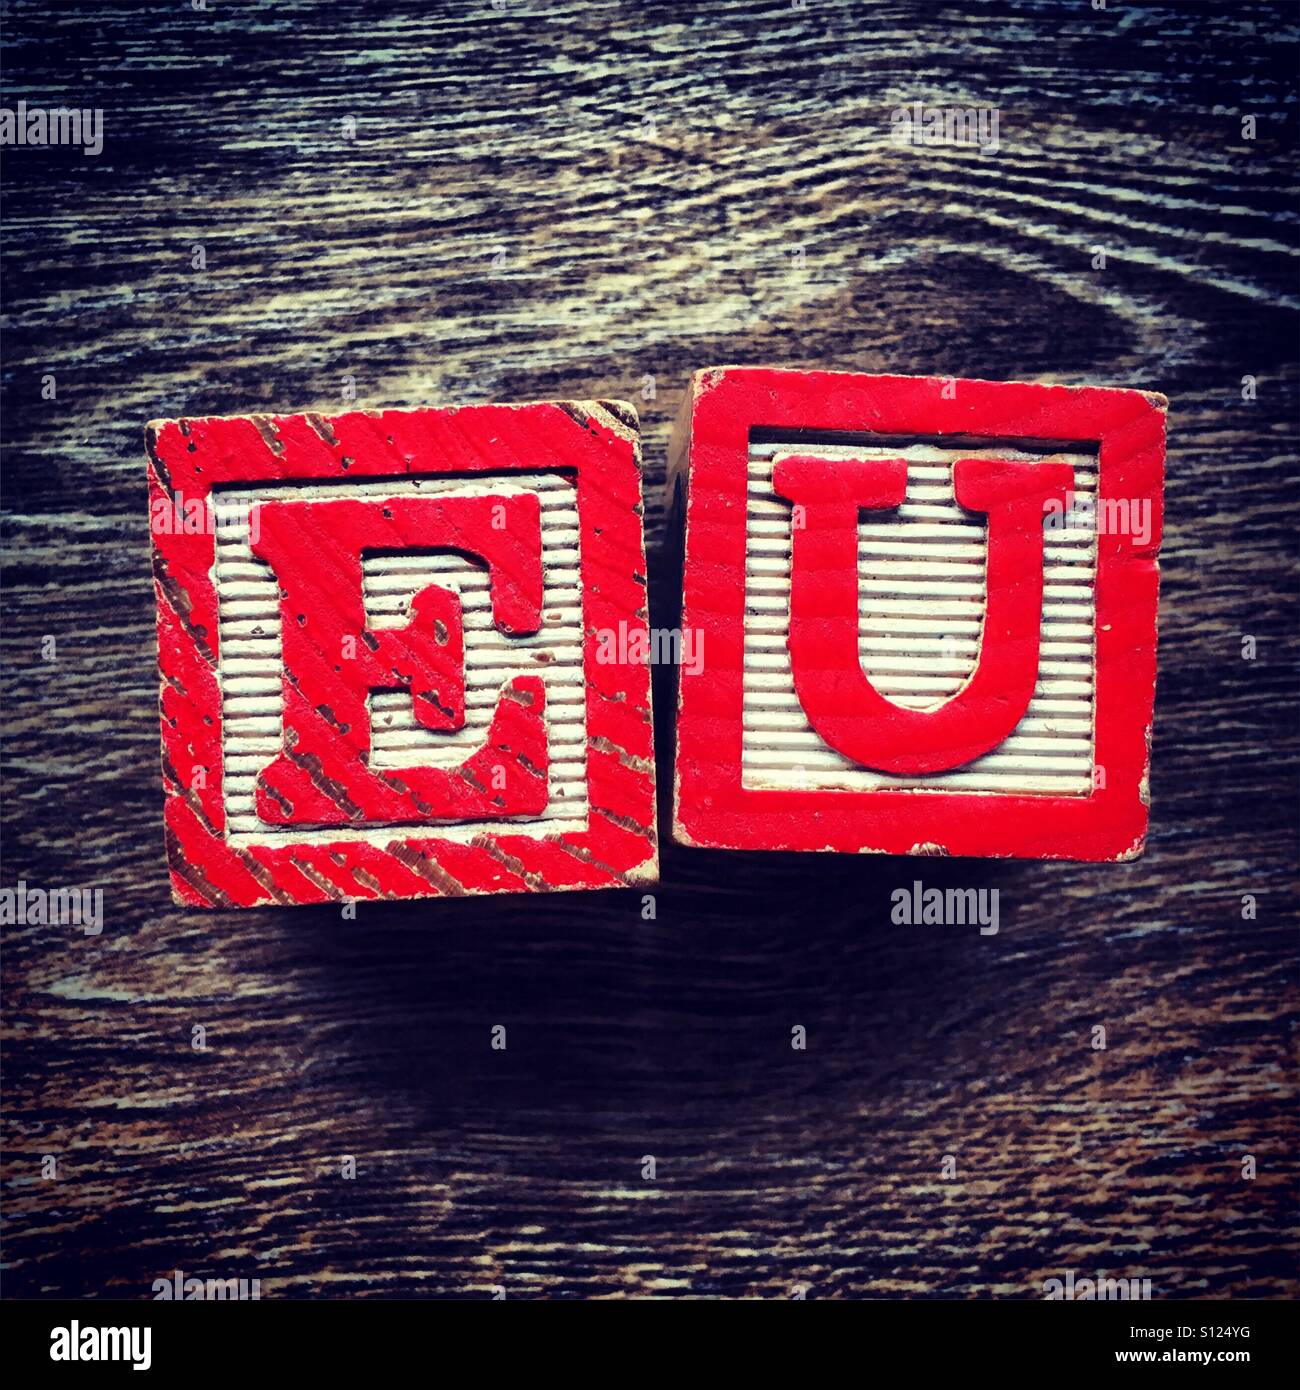 EU abbreviation written with wood block letter toys Stock Photo